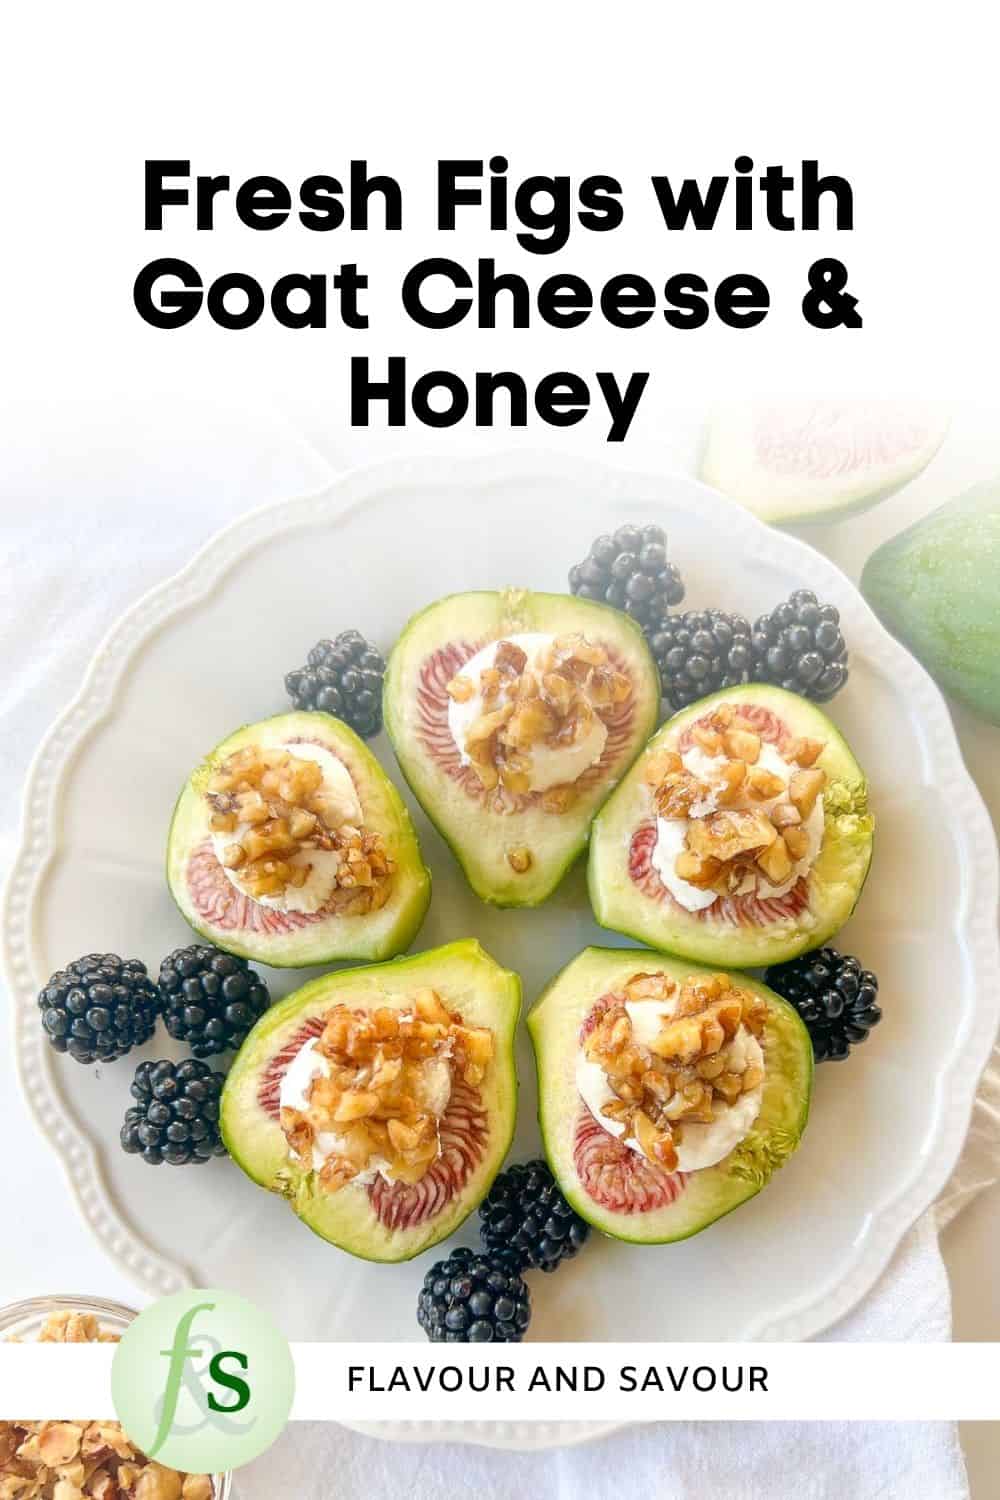 Image with text overlay for fresh figs with goat cheese and honey.